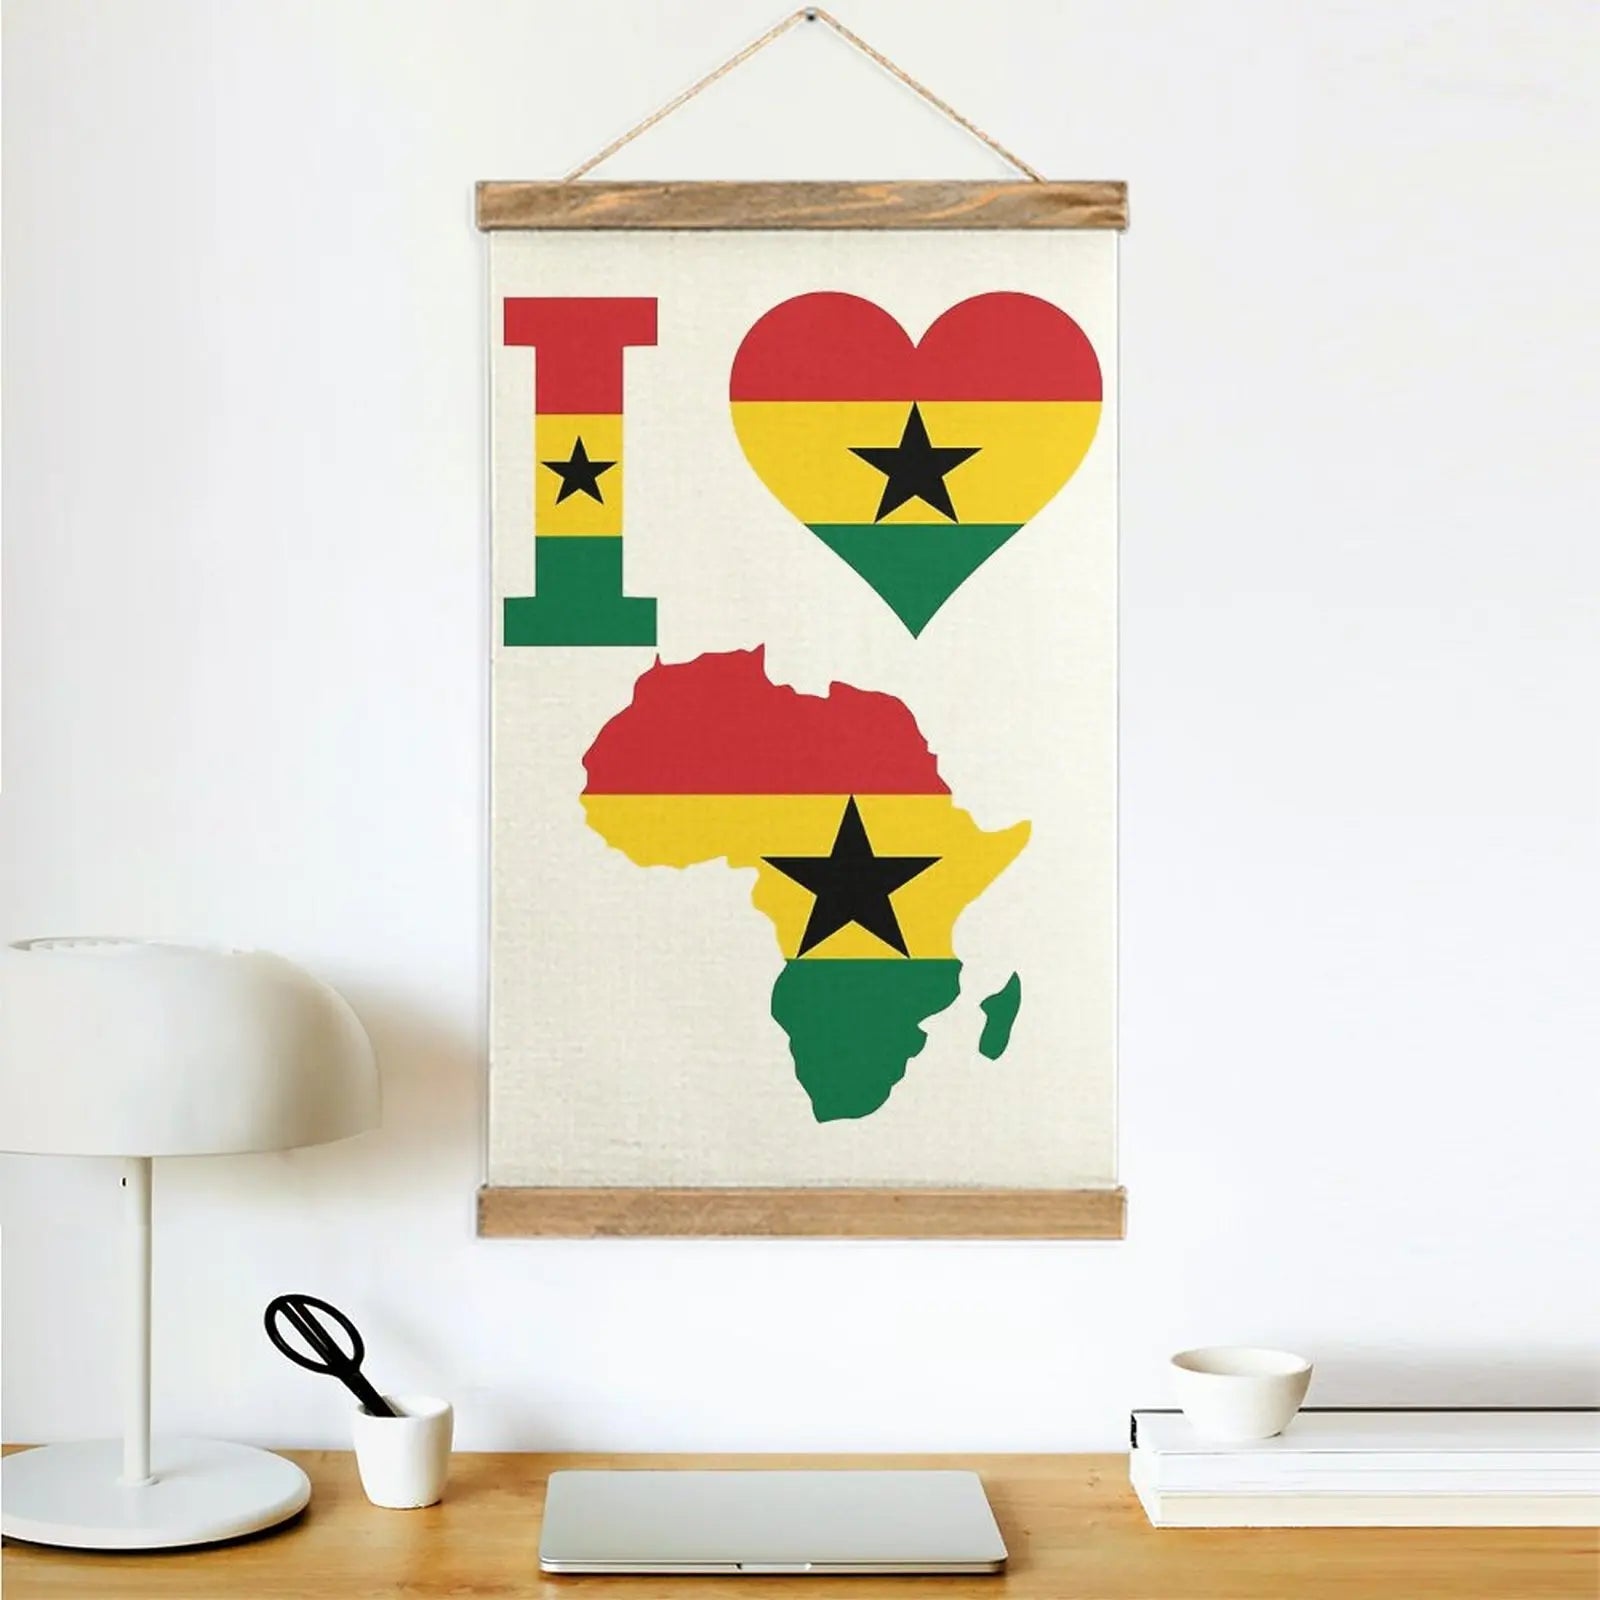 Ghanaian Pride: Africa Map T-Shirt and Canvas Wall Art – A Playful Fusion of Style - Flexi Africa - Flexi Africa offers Free Delivery Worldwide - Vibrant African traditional clothing showcasing bold prints and intricate designs